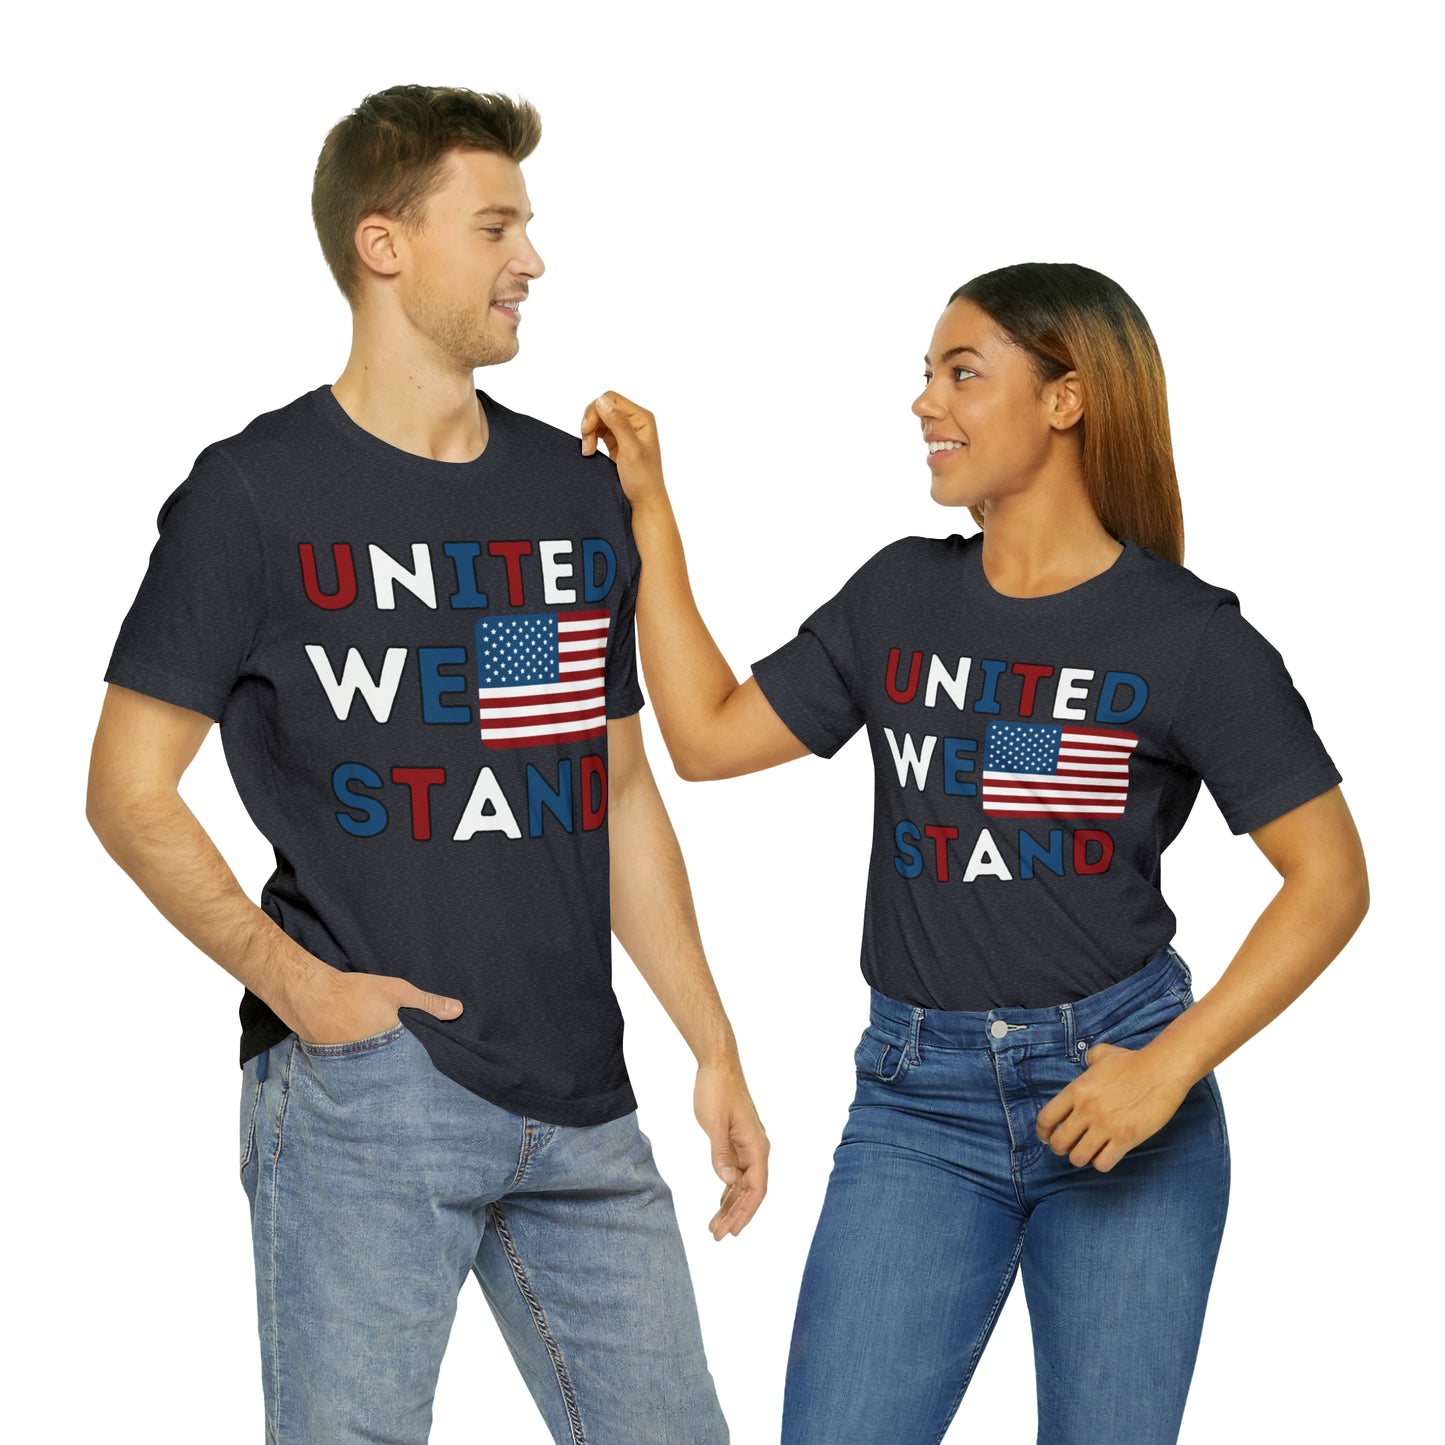 United We Stand shirt, USA Flag shirt, 4th of July shirt, Independence Day shirt